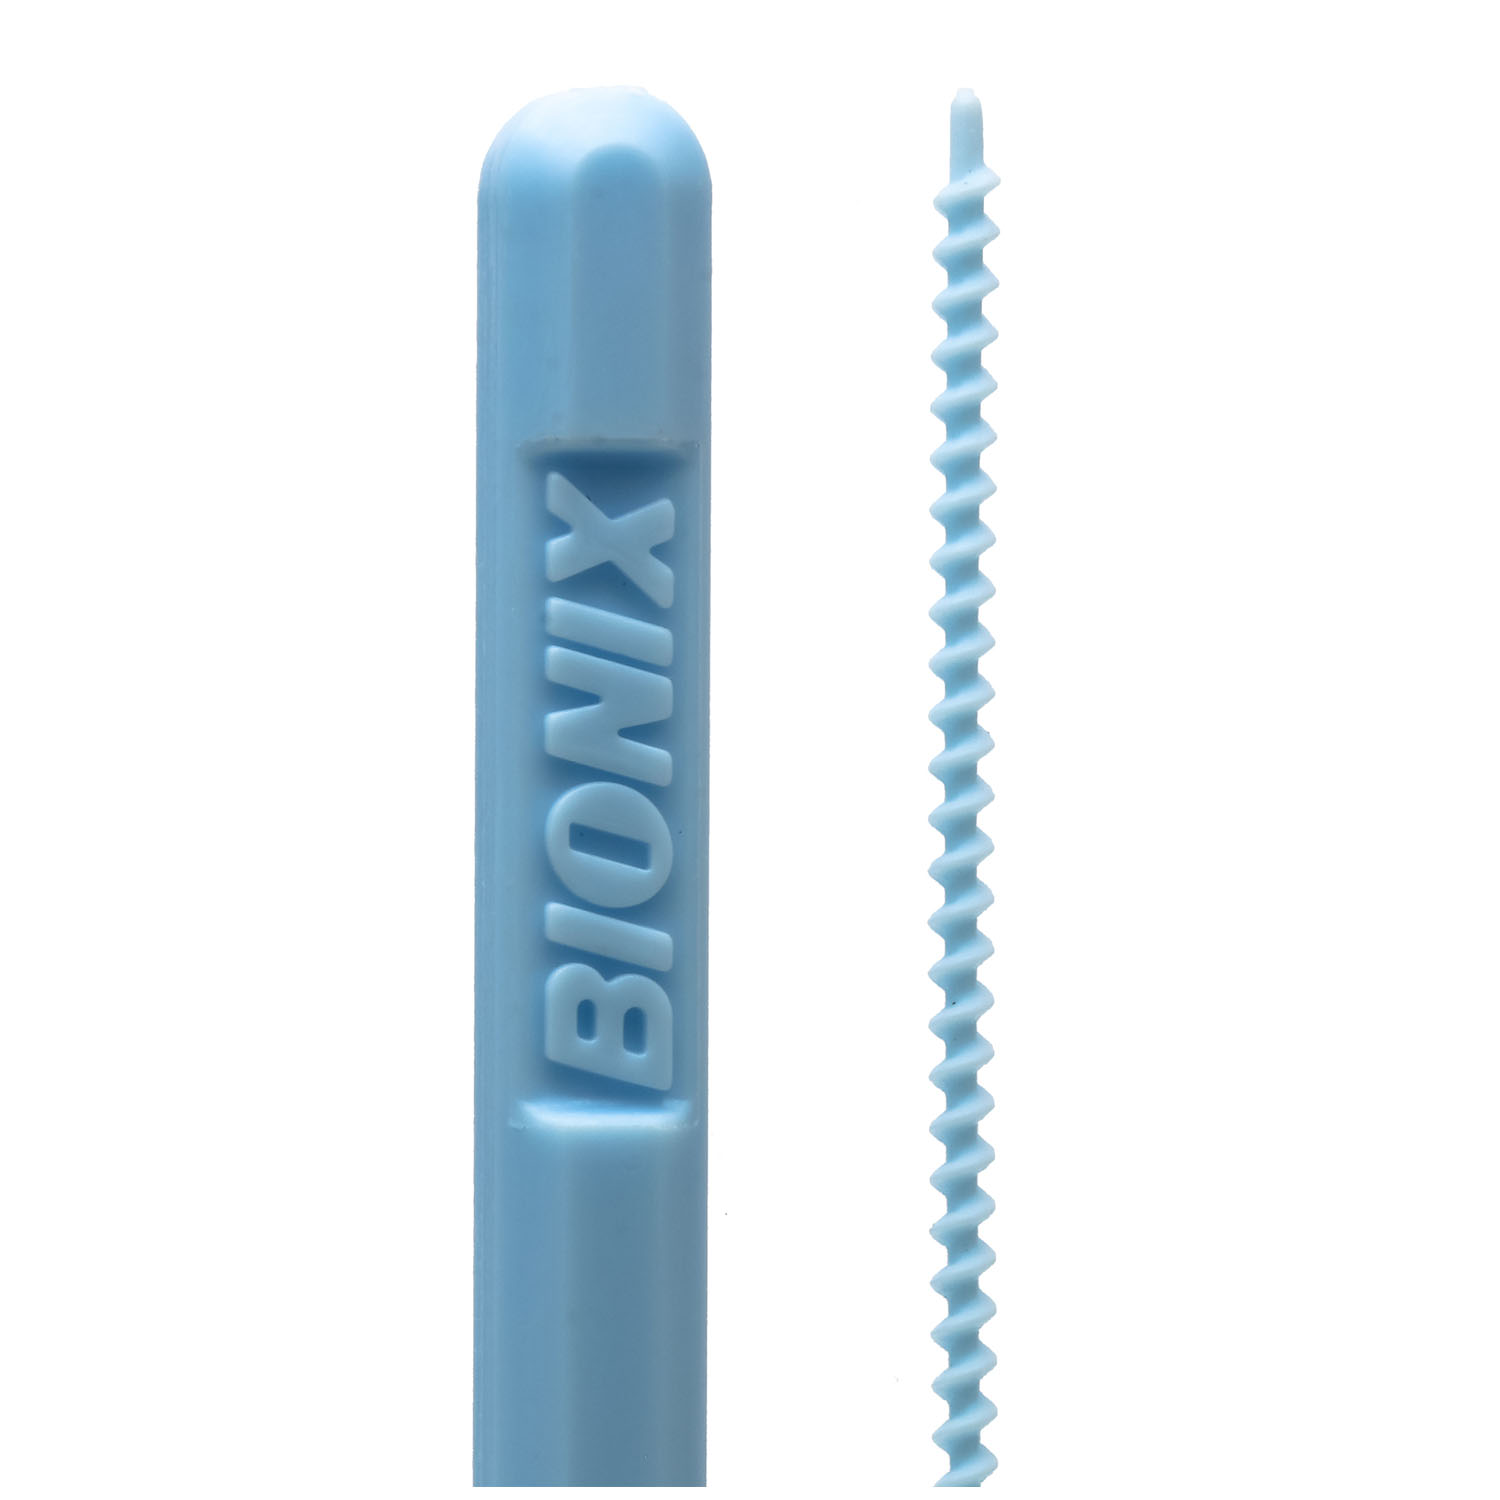 BIONIX DECLOGGER FOR ENTERAL FEEDING TUBES : 911 BX $90.81 Stocked